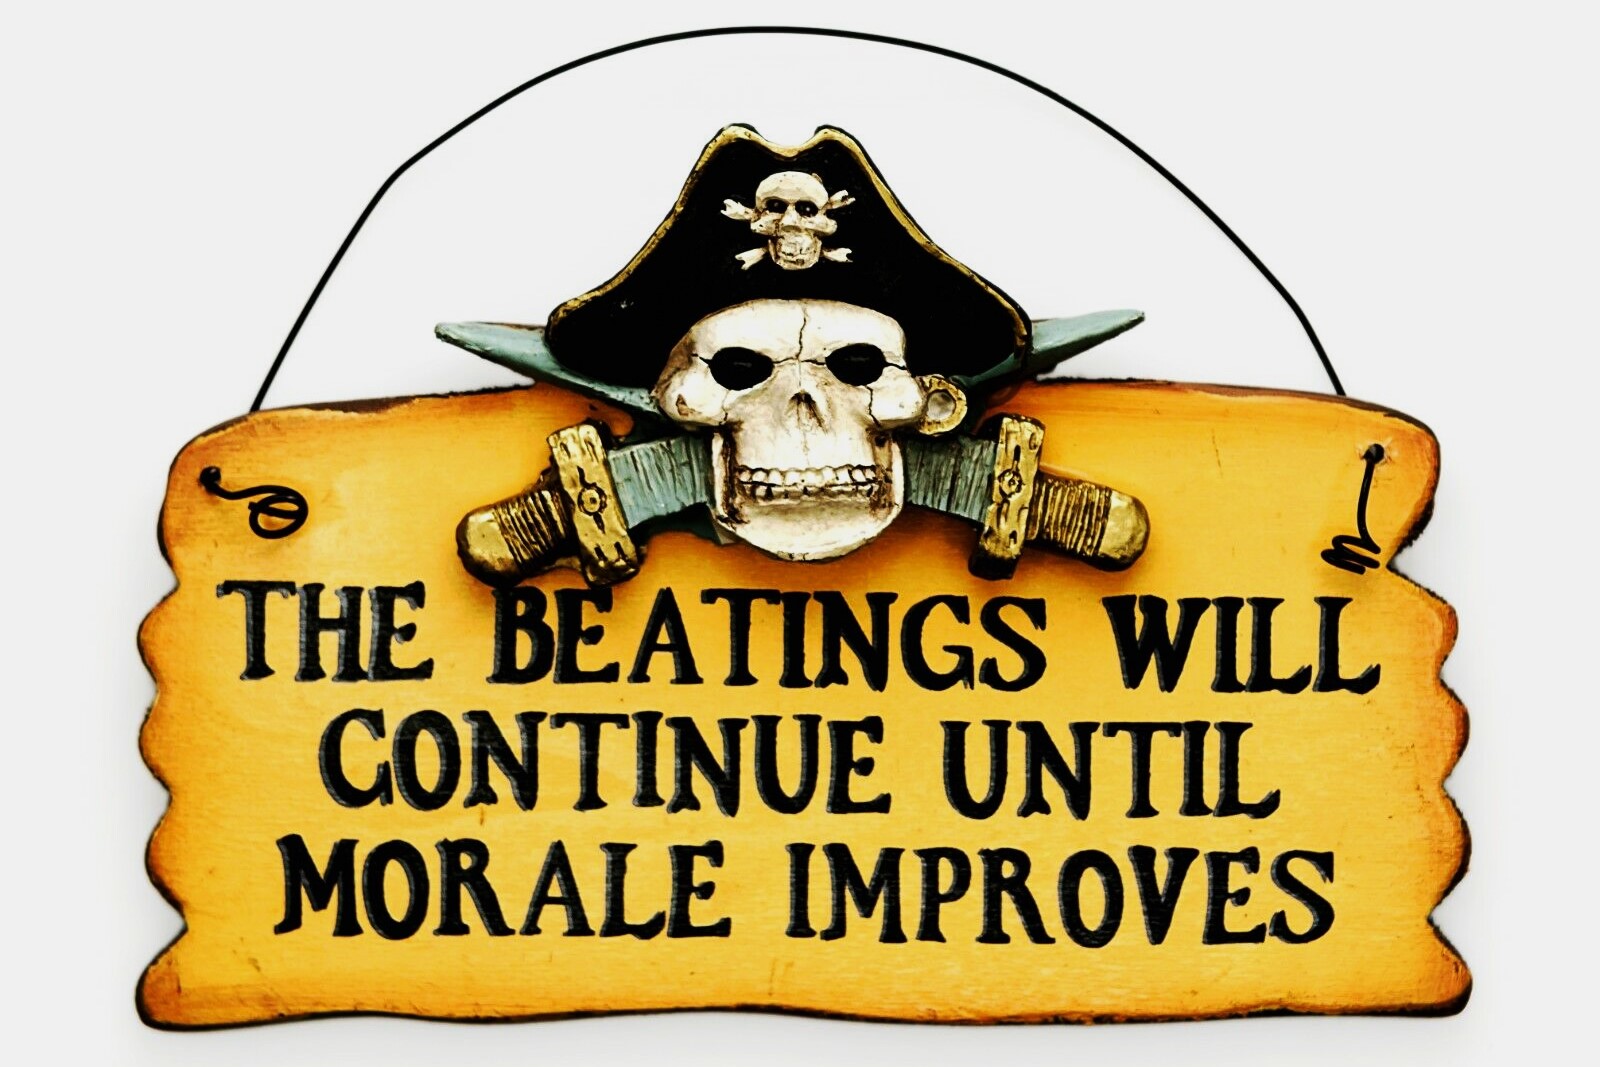 The Dark Origins Of “The Beatings Will Continue Until Morale Improves”